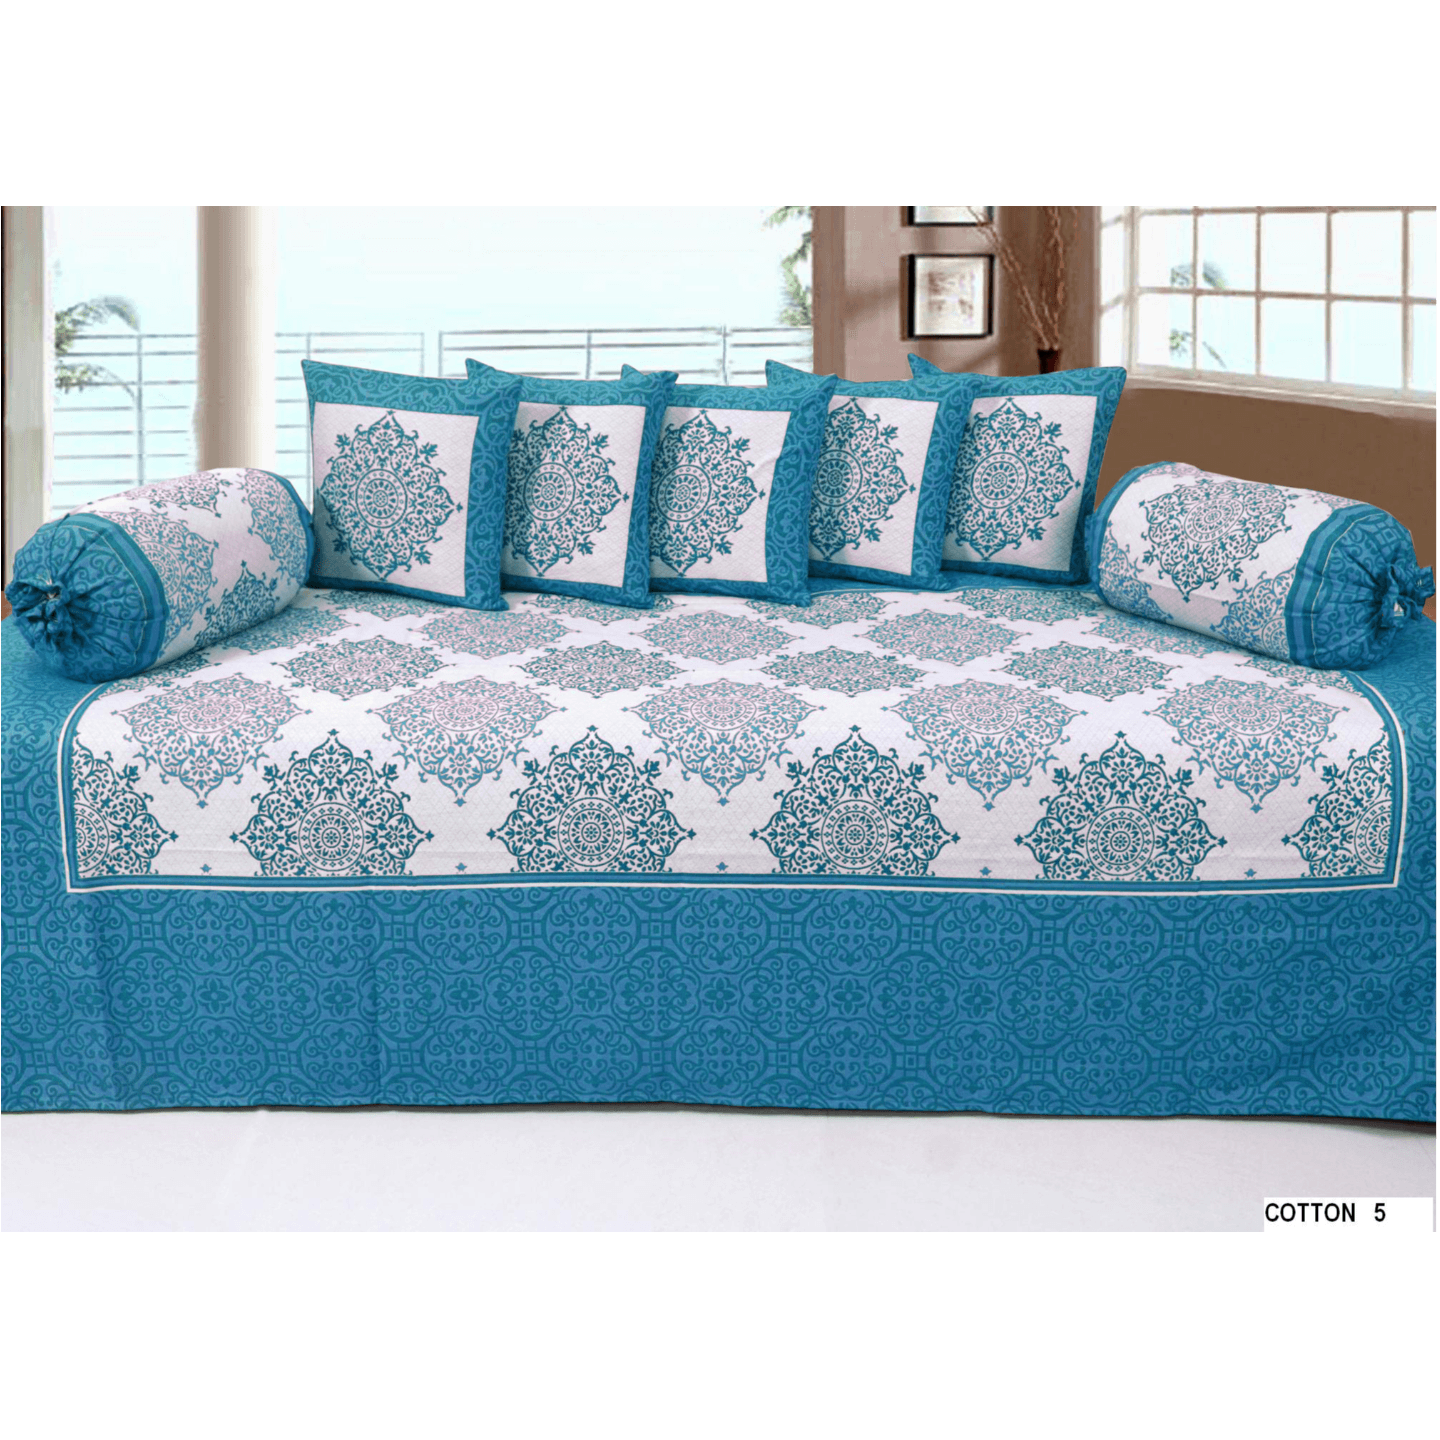 Handtex Home Heavy Cotton Diwan Set-8PC1 Single Bedsheet,2 Blosters & 5 Cushion Covers Blue